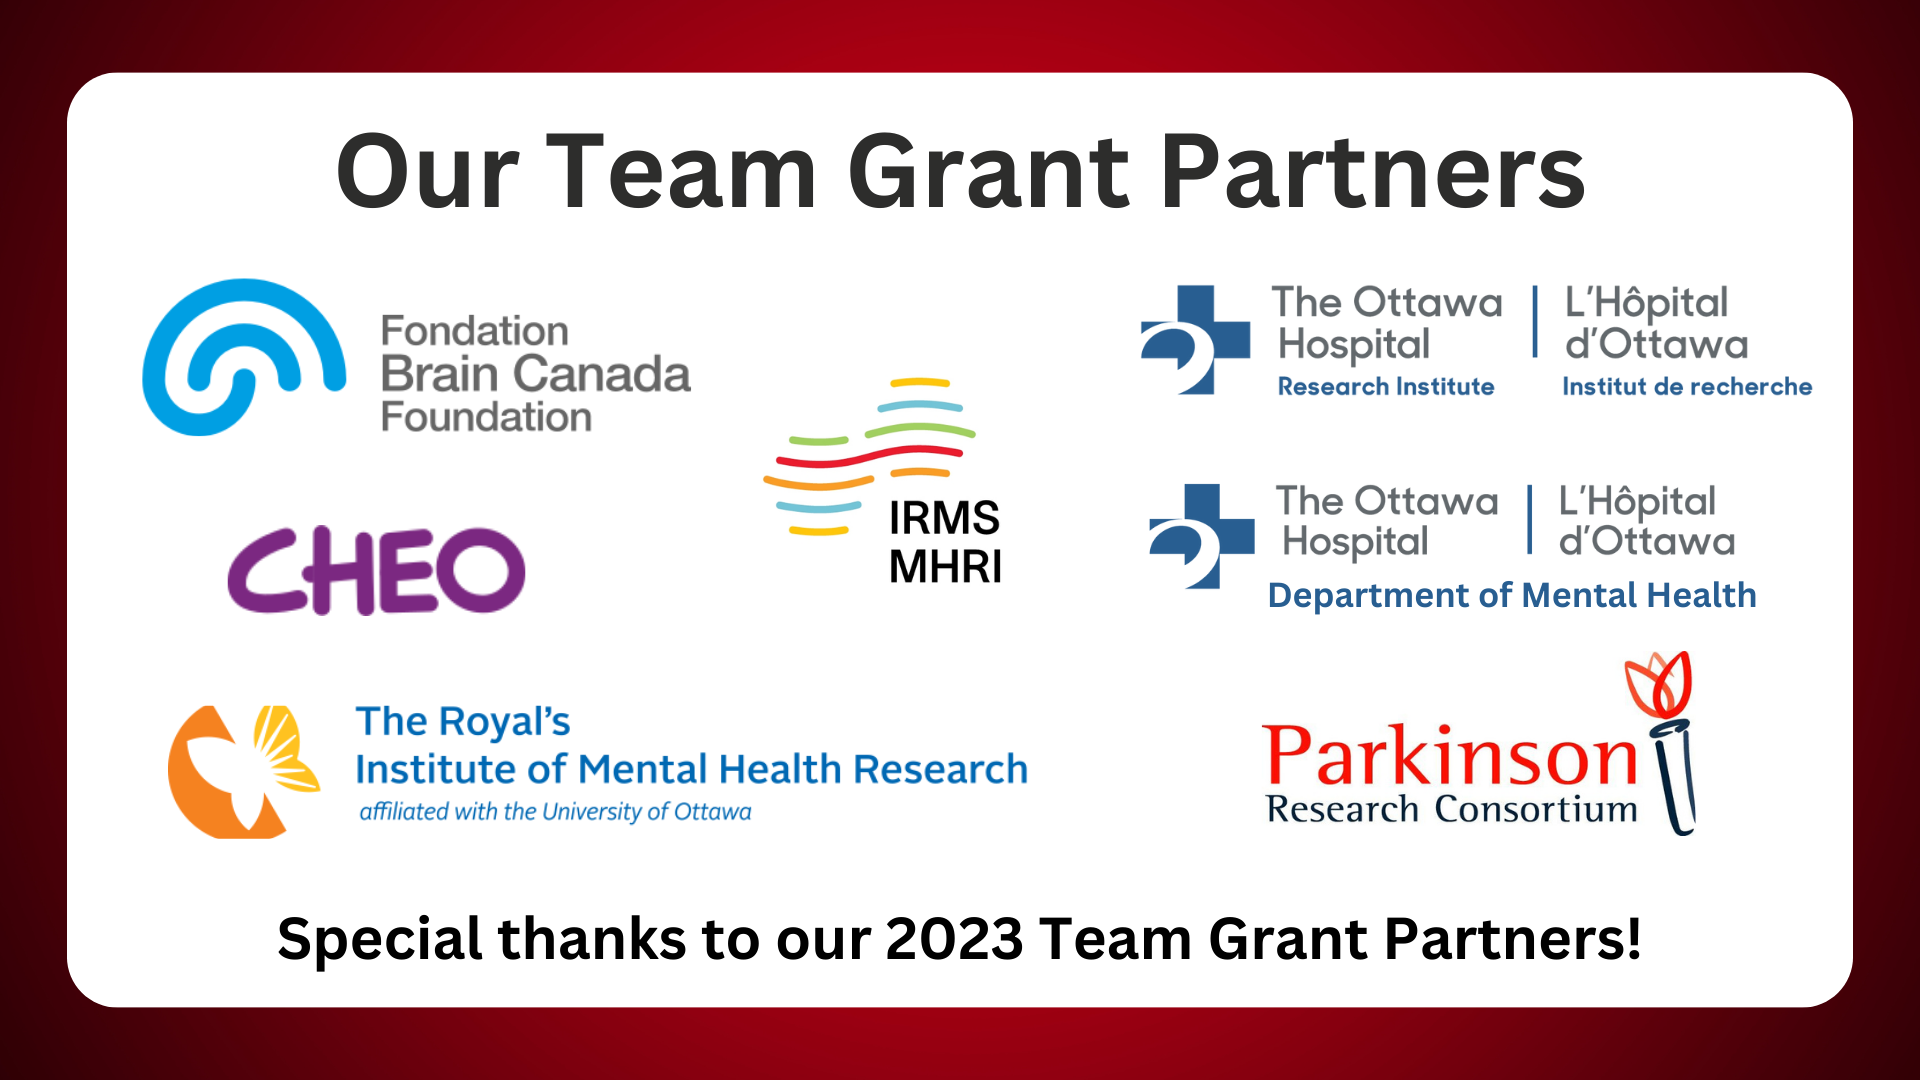 "Our Team Grant Partners" with logos for Brain Canada Foundation , Cheo, The royal institute of Mental Health Research, MHRI, Parkinson Research Consortium, The Ottawa hospital and the Ottawa hospital department of Mental Health.